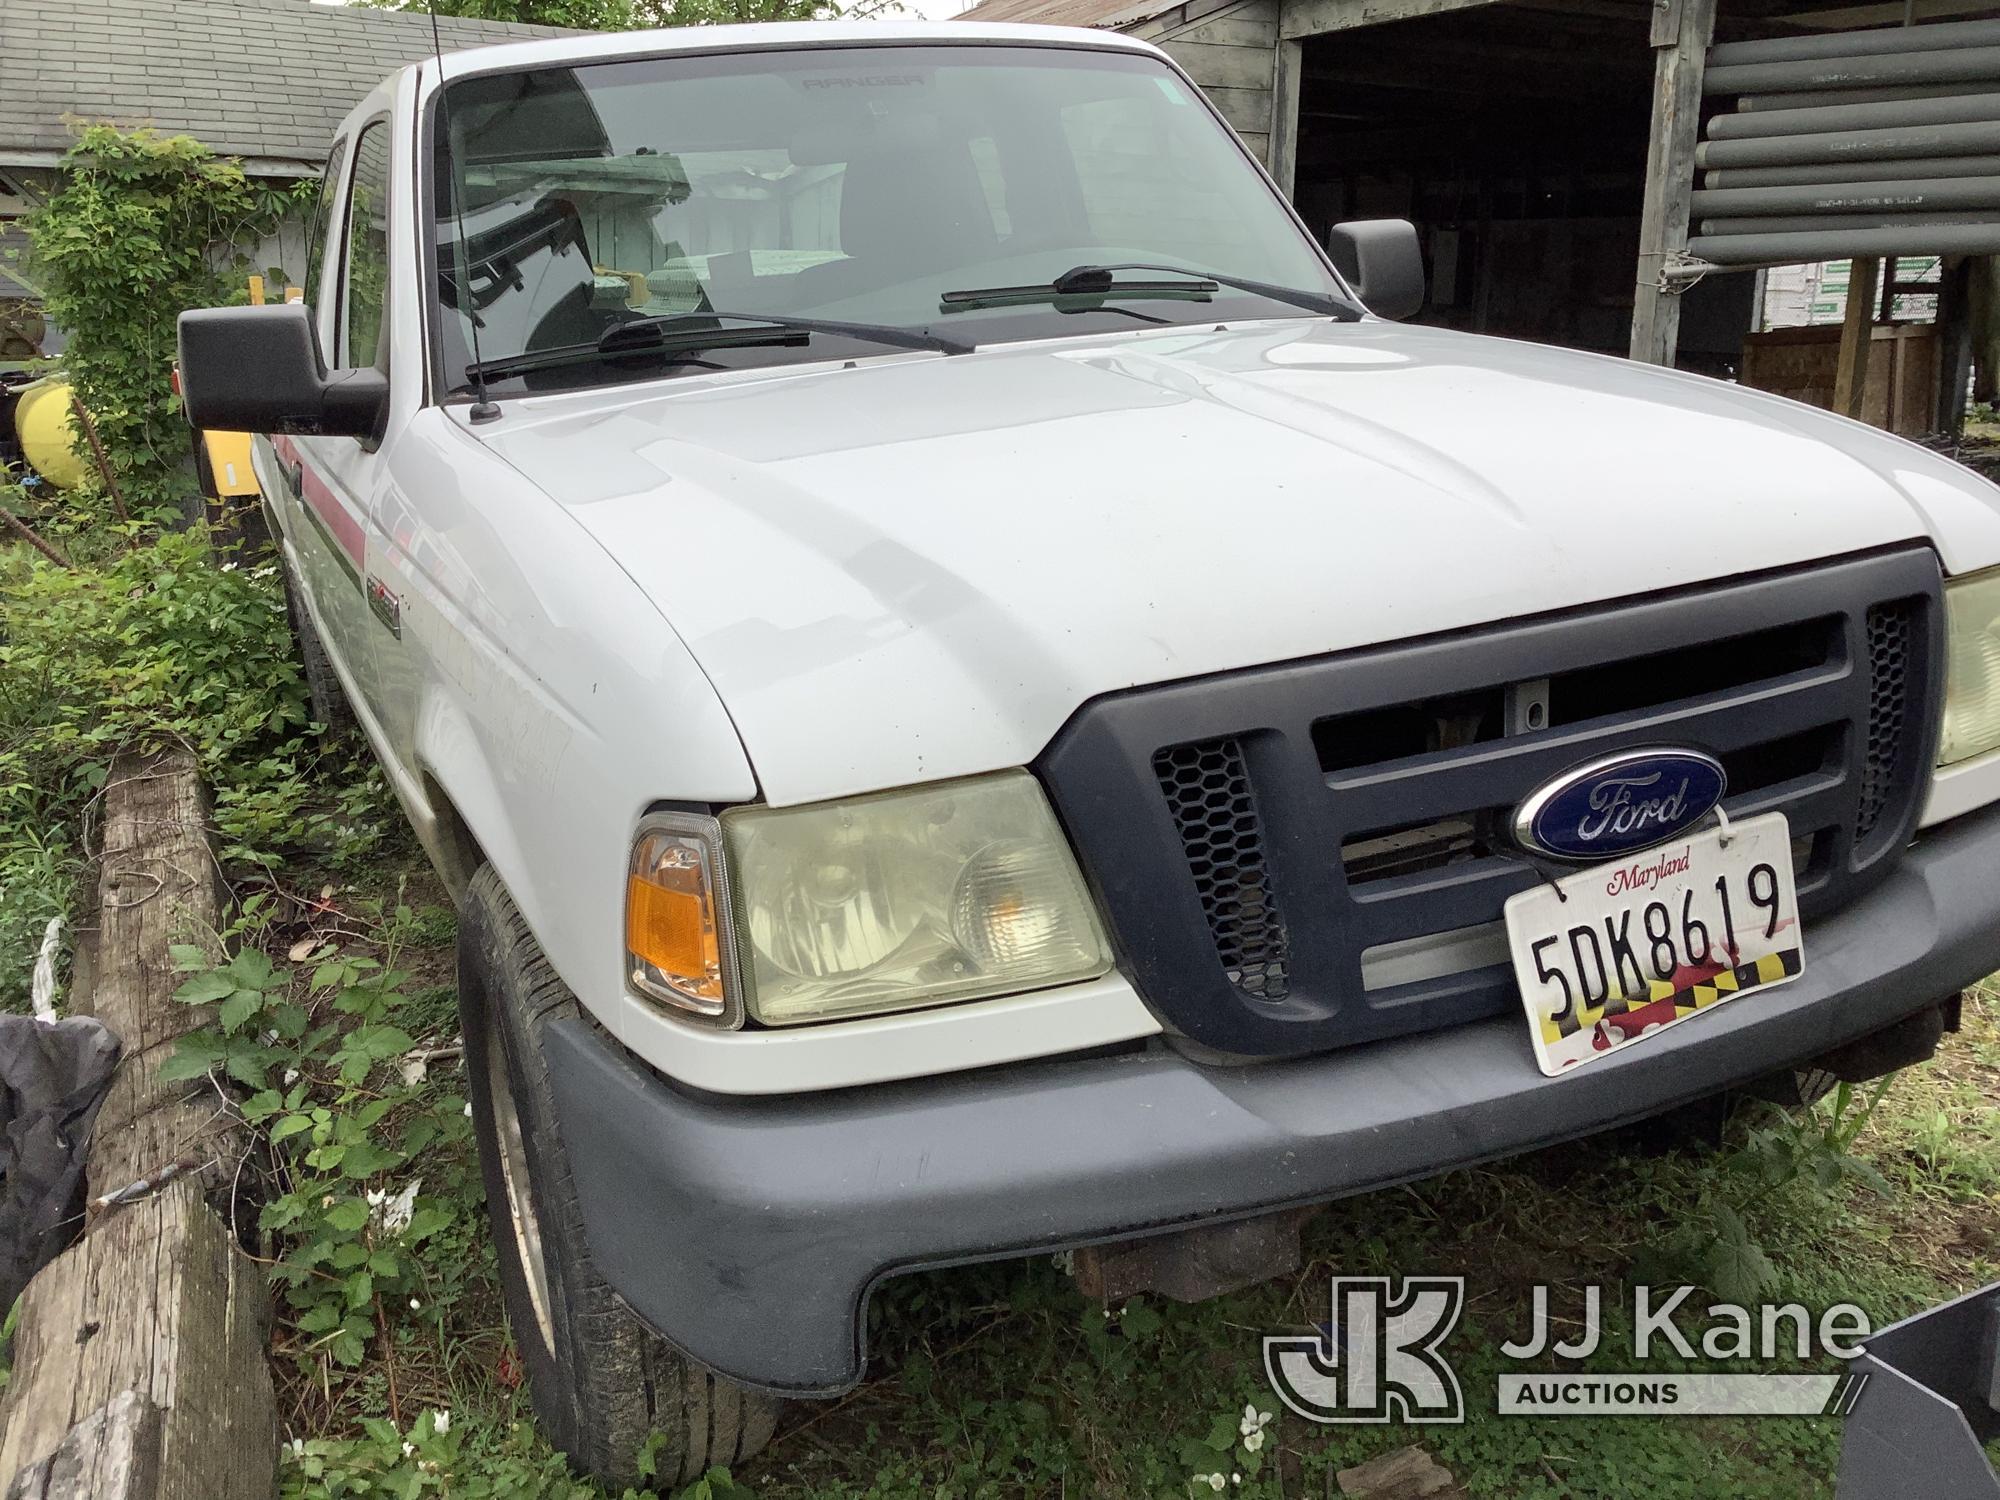 (Harmans, MD) 2011 Ford Ranger 4x4 Extended-Cab Pickup Truck Not Running, Condition Unknown, Hood Do